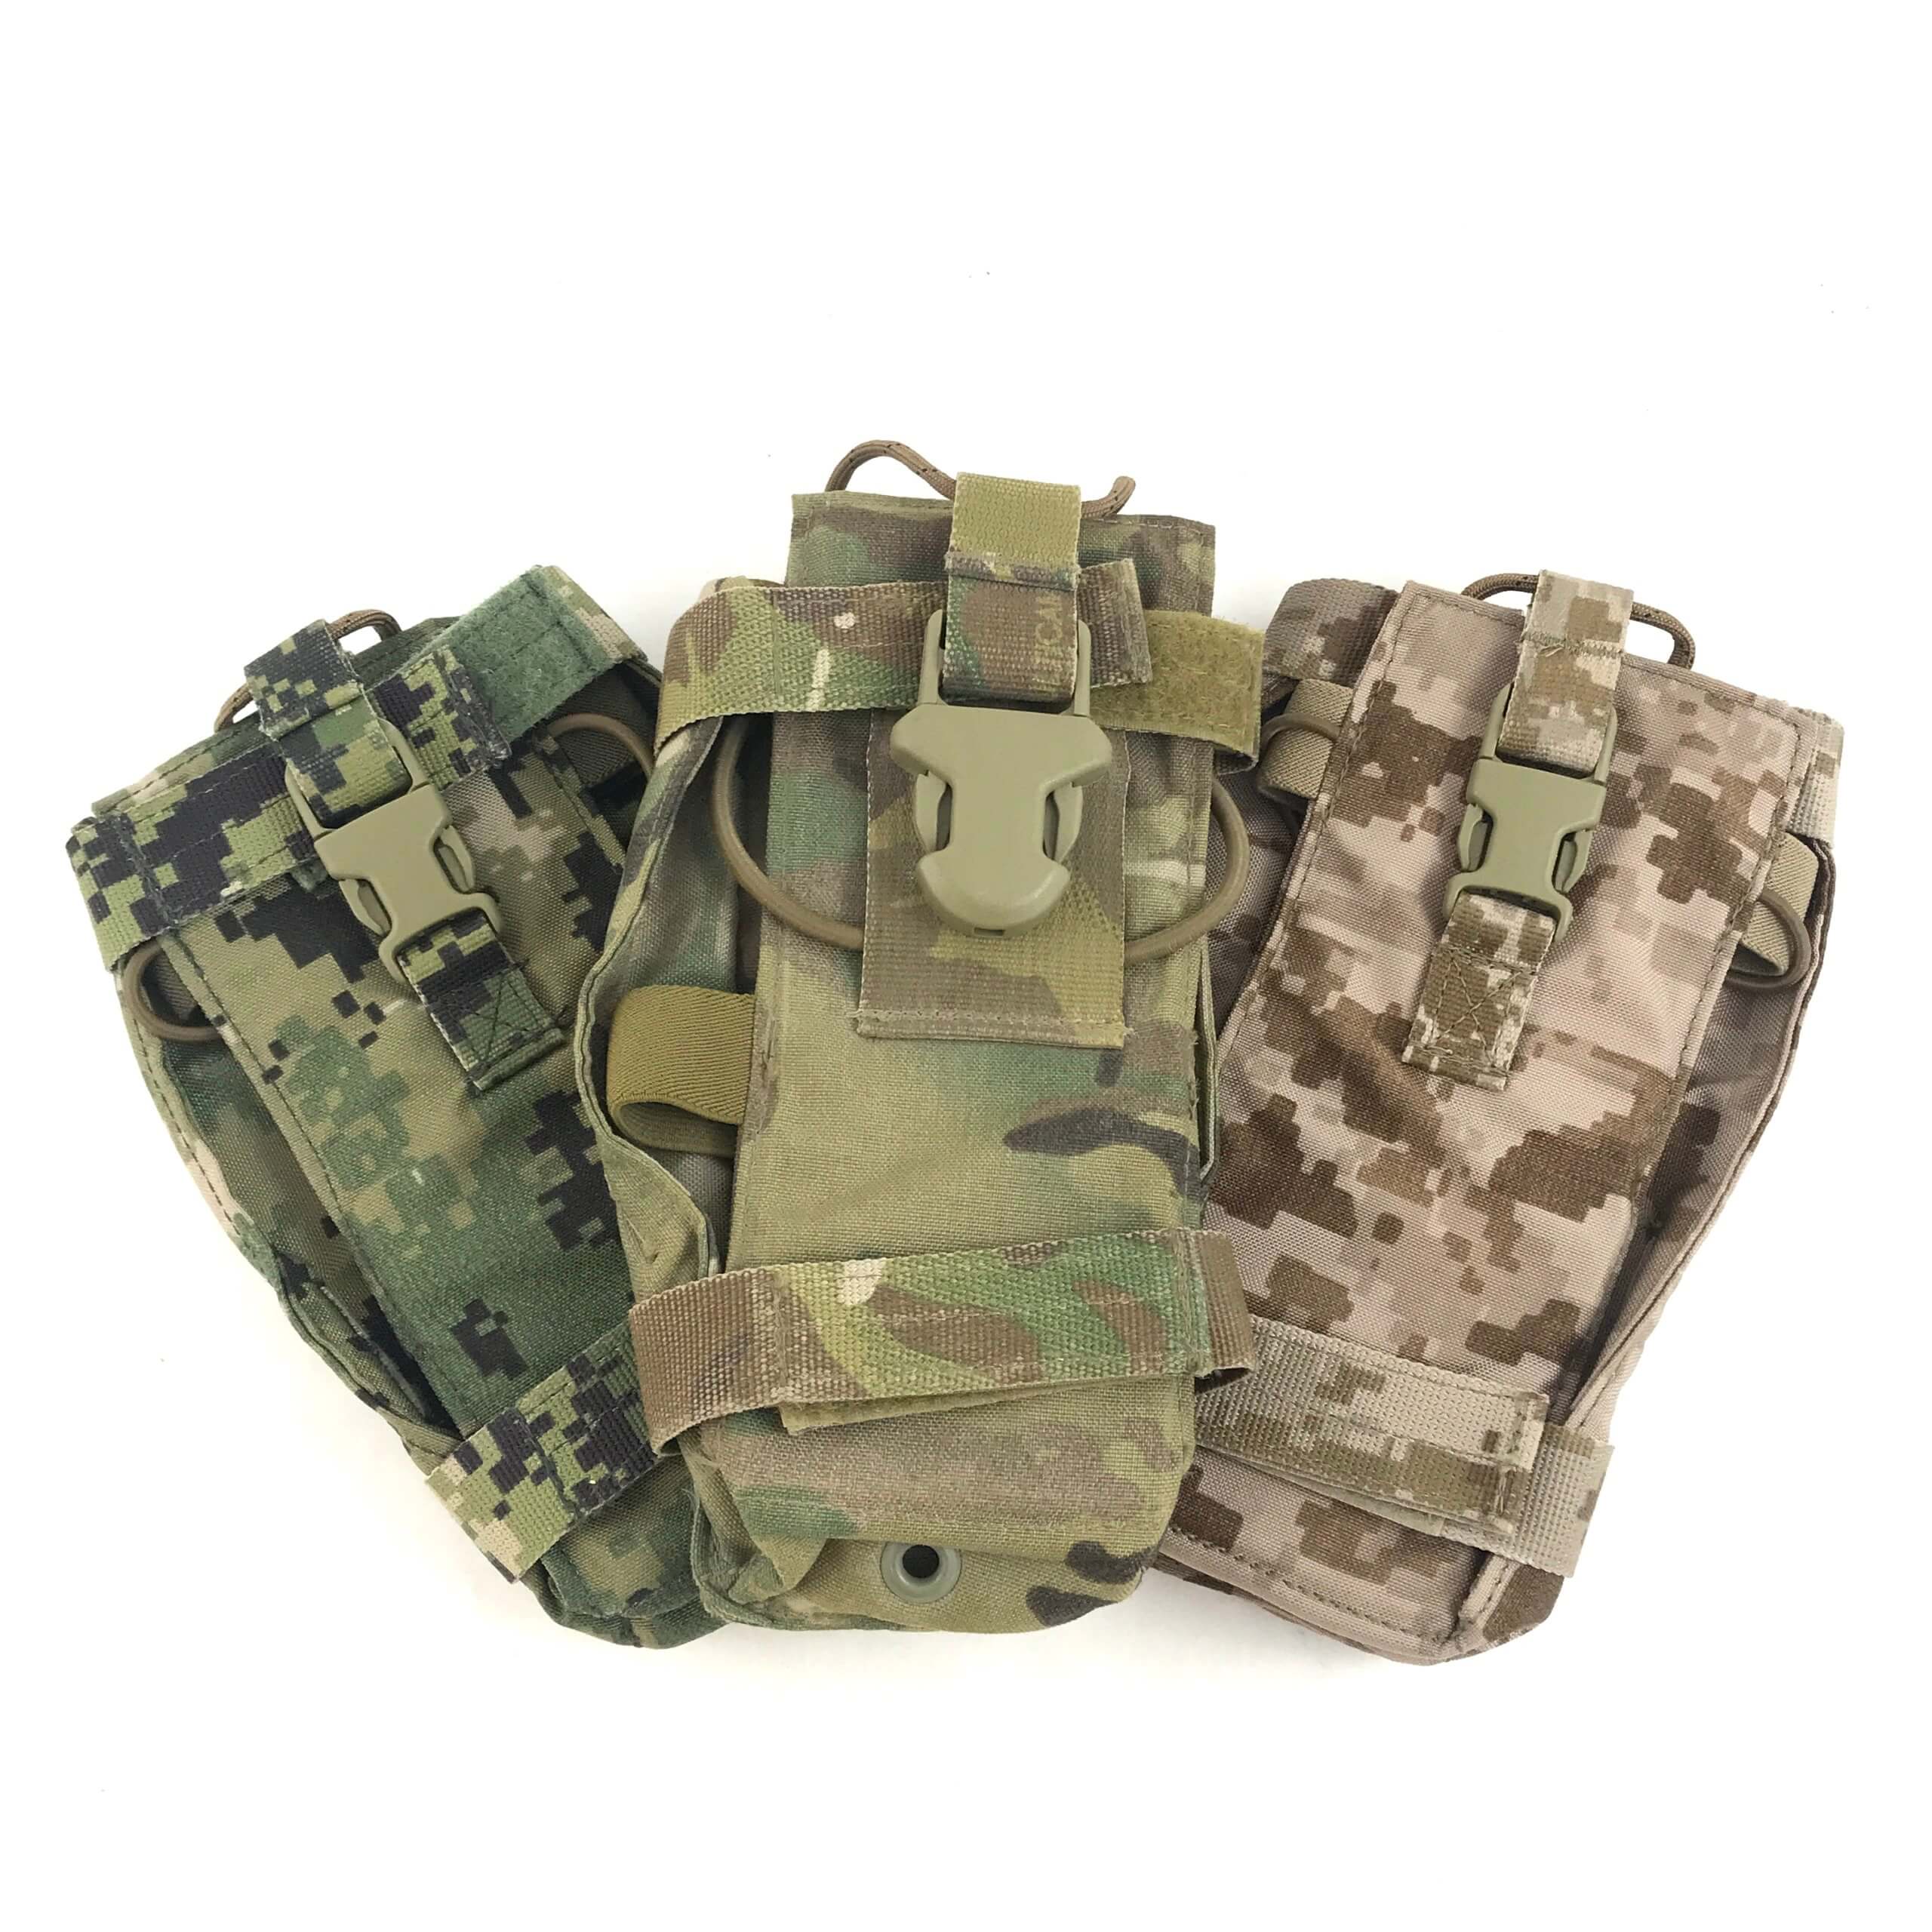 Eagle Industries MBITR Radio Pouch OD Green LE Marshals SWAT DFLCS